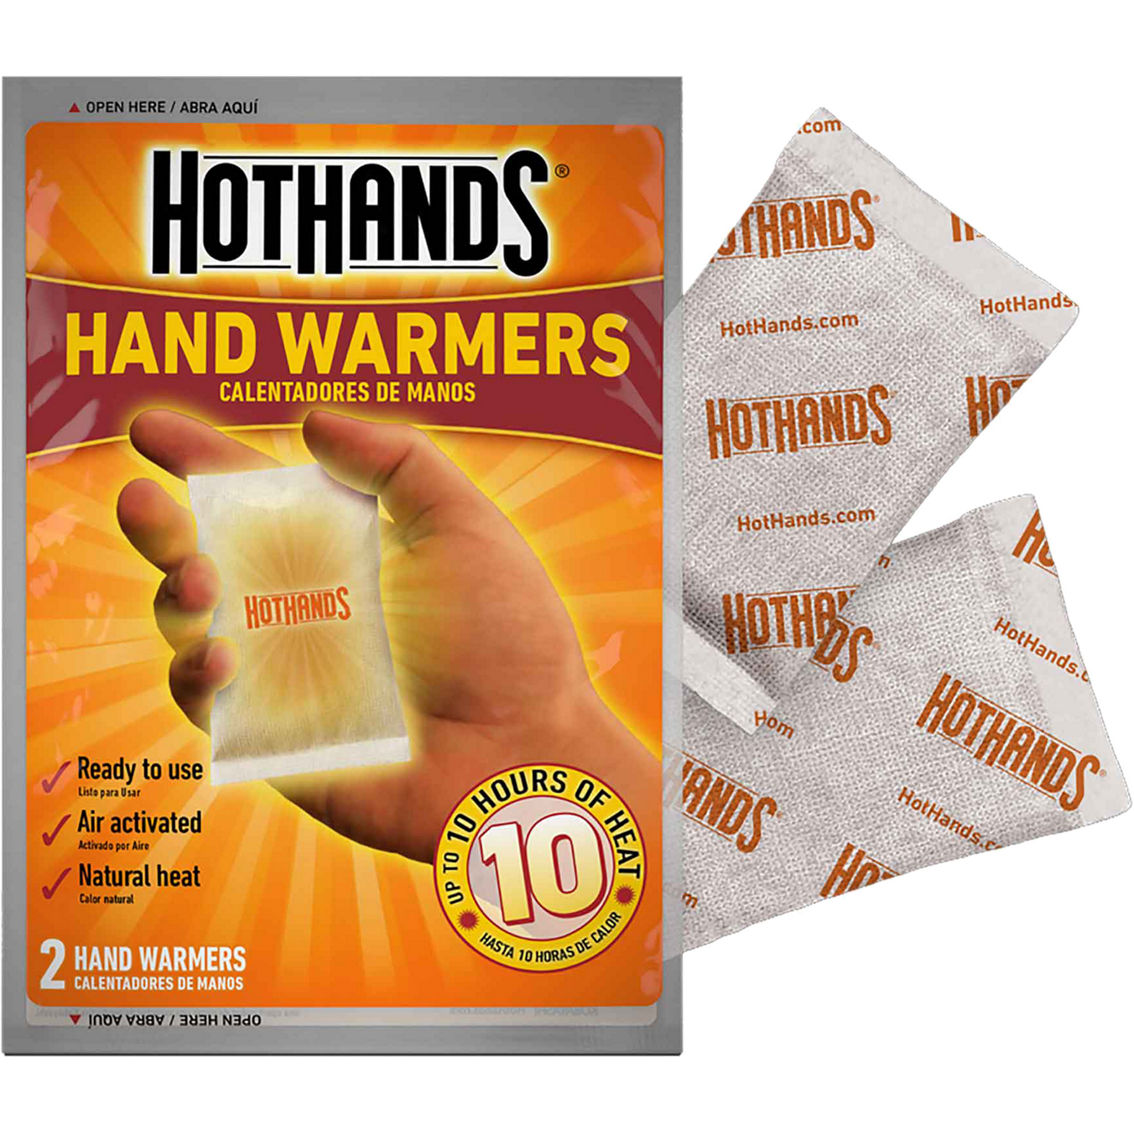 Brigade QM Hothands Hand Warmers, 2 pair - Image 2 of 3